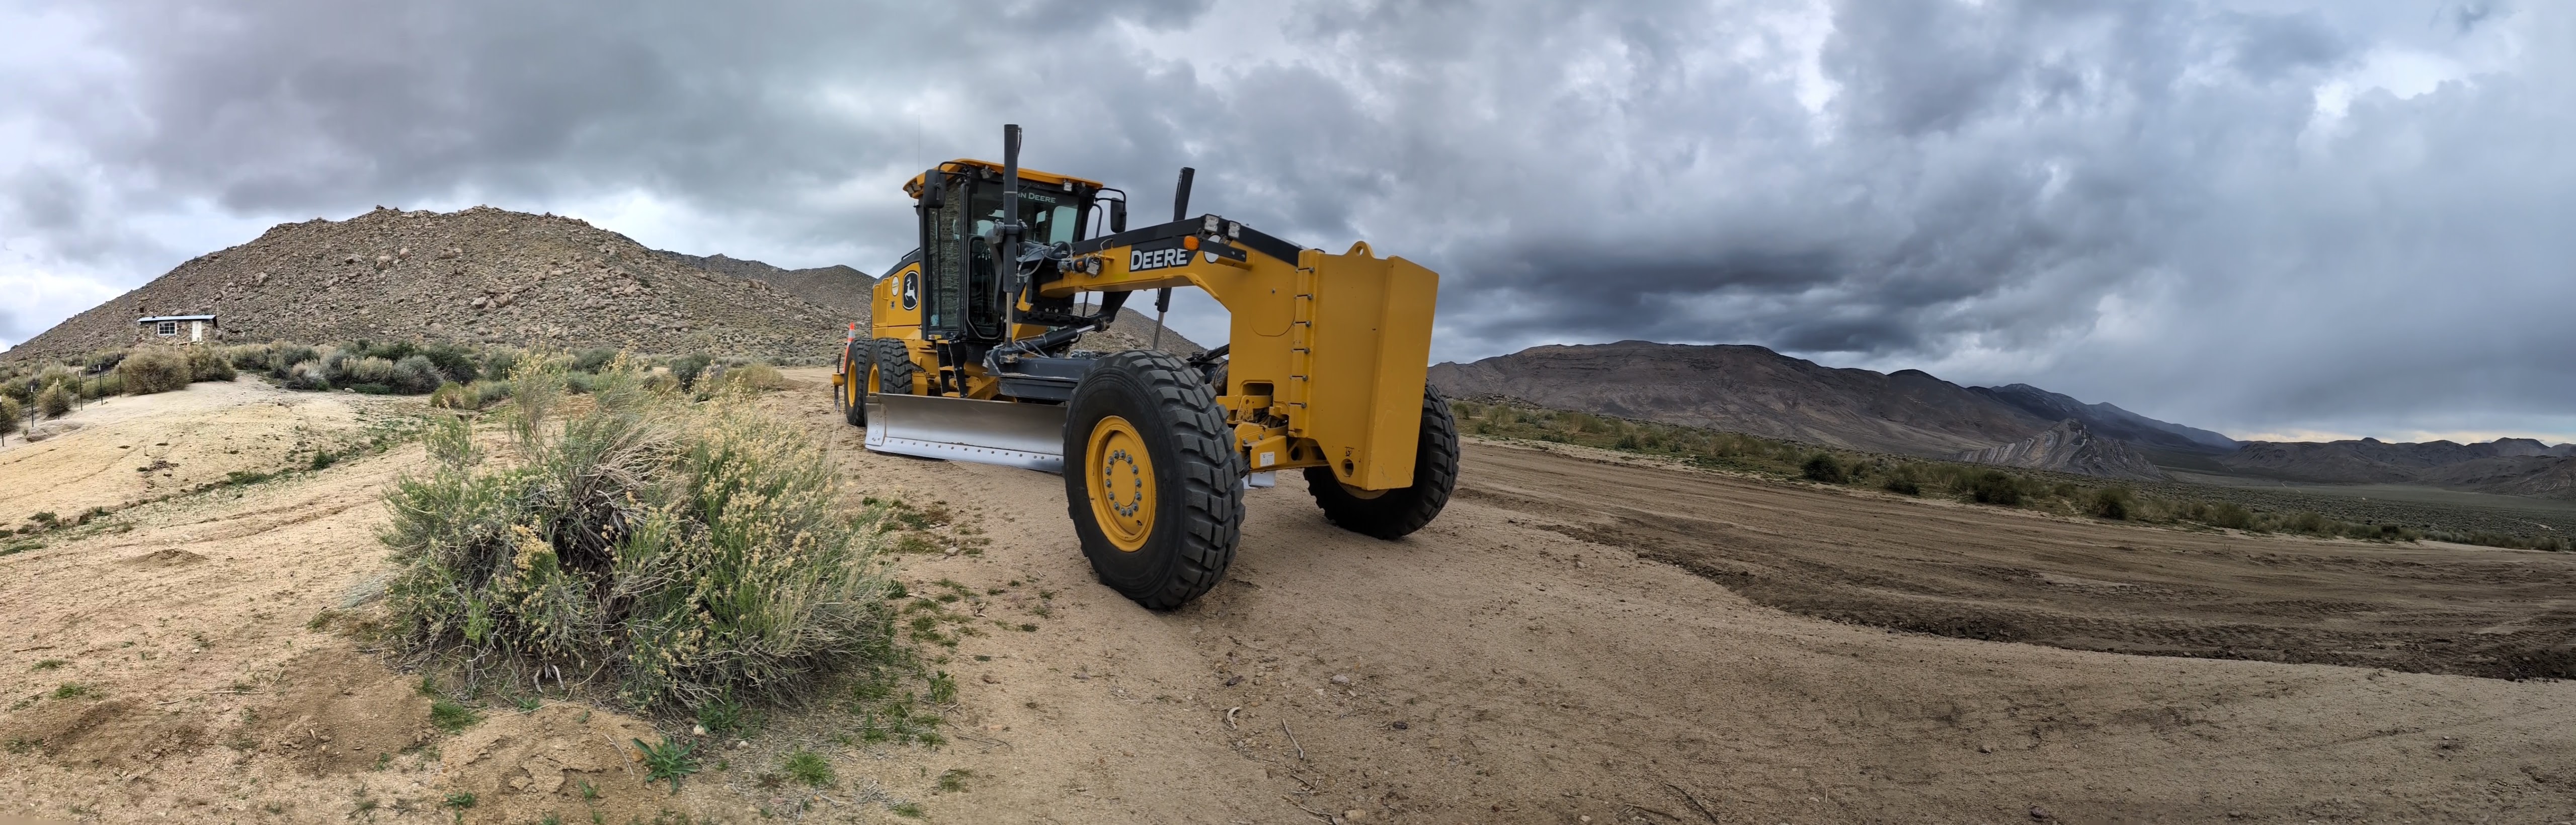 Panoramic photo of a large yellow machine in a bare desert landscape with dramatic clouds.